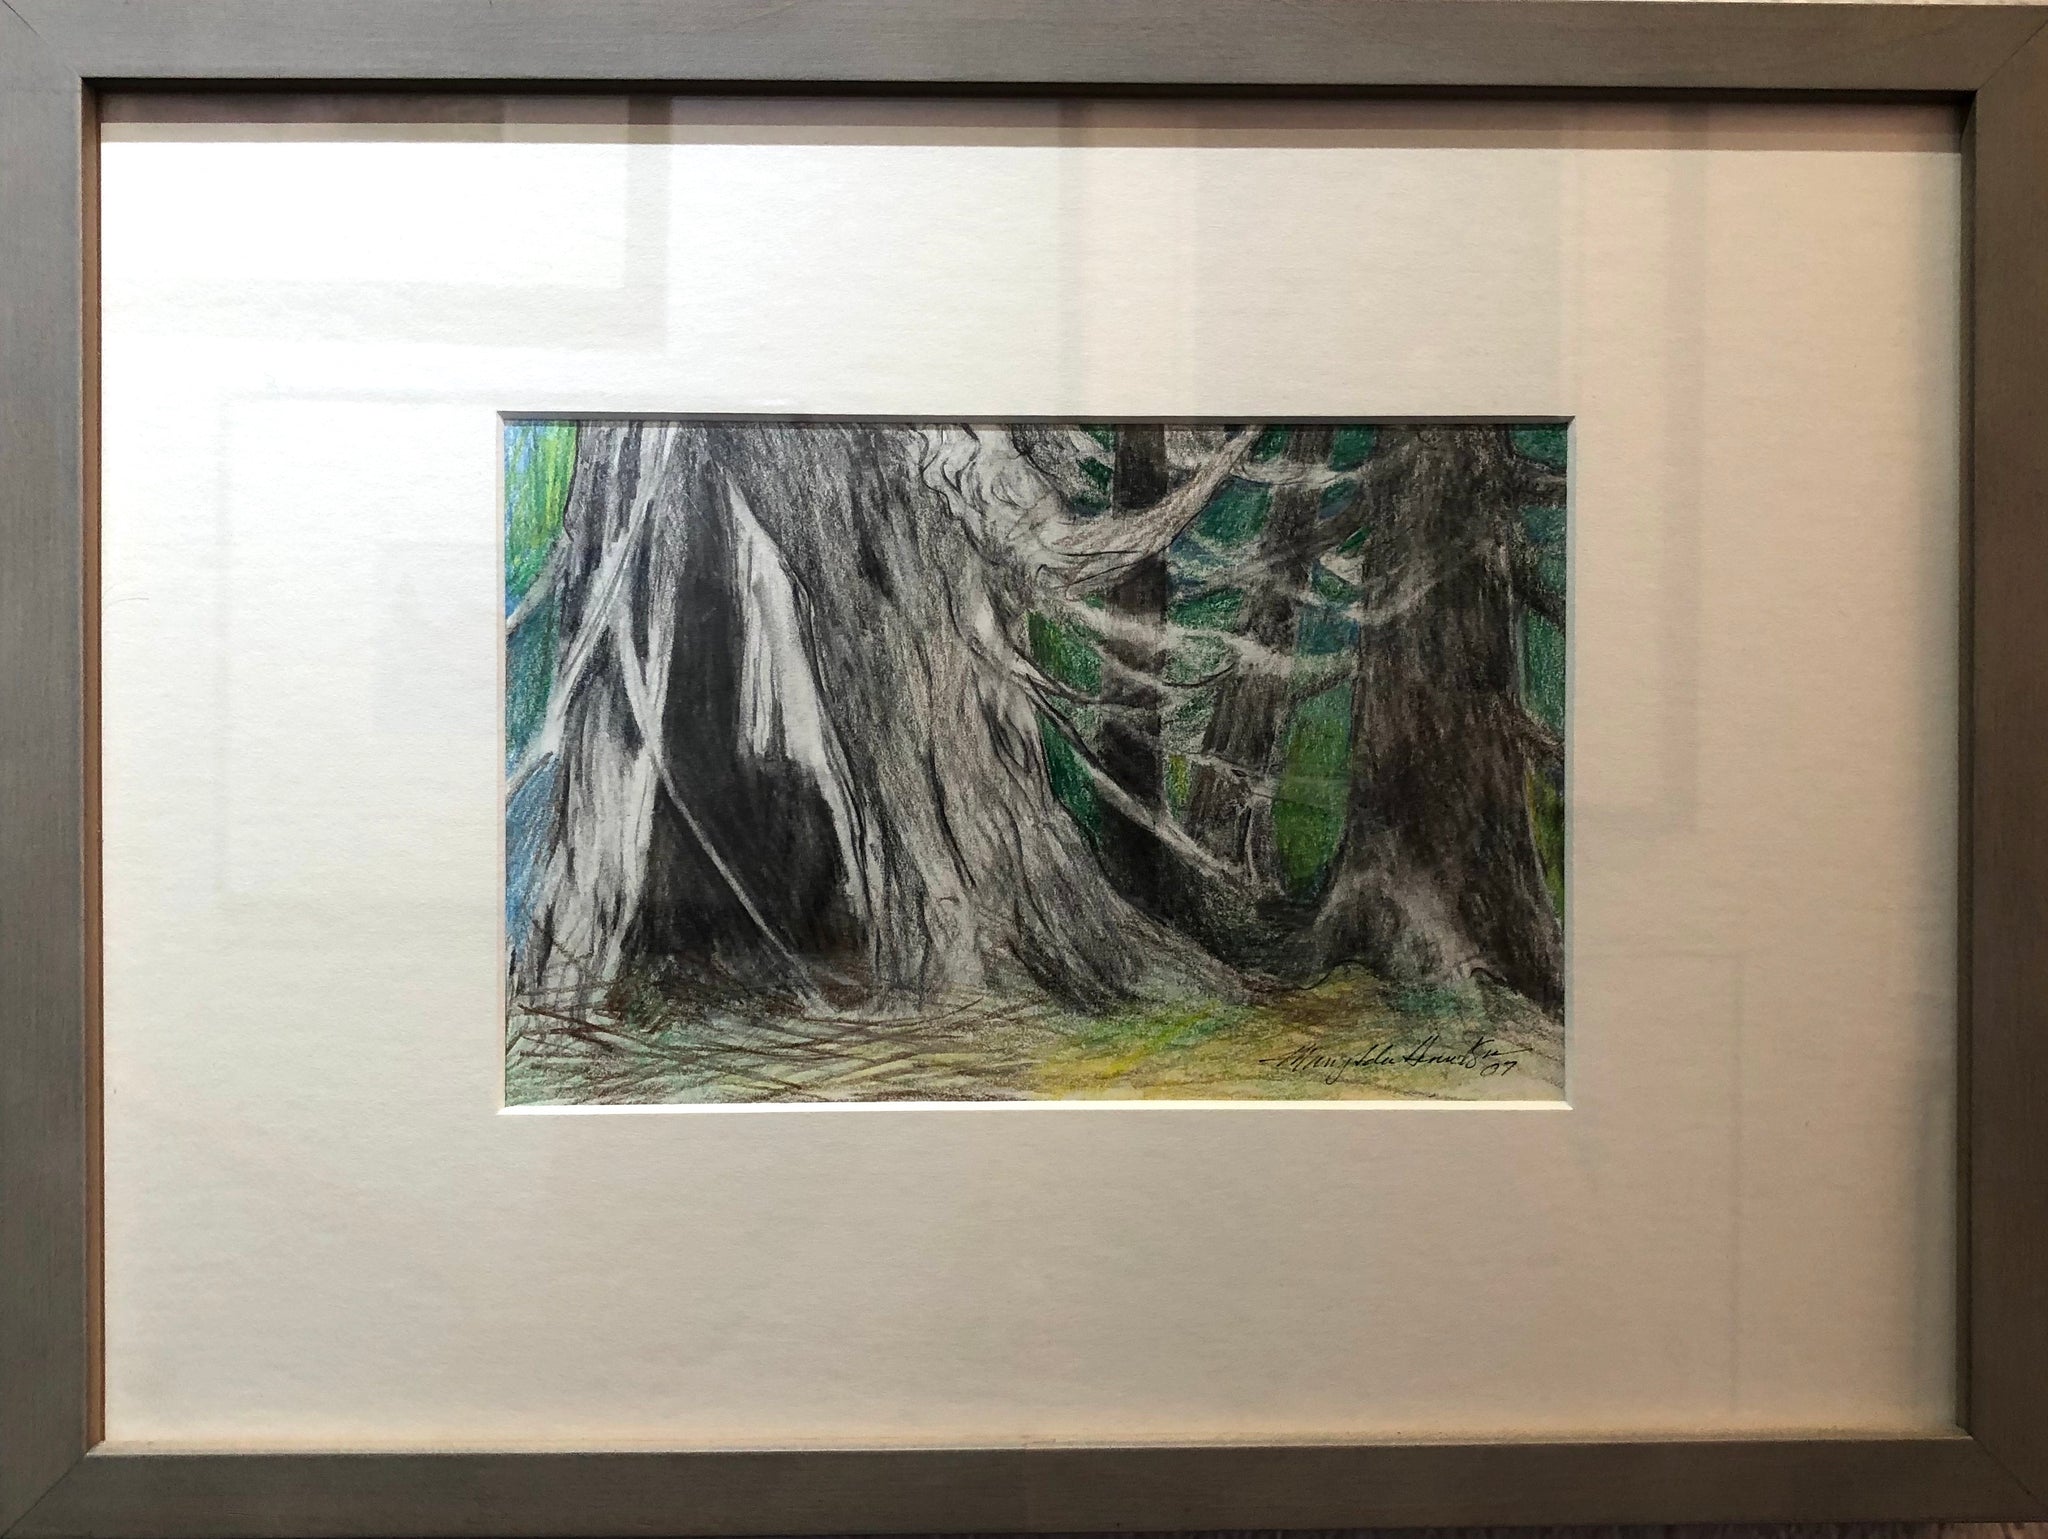 FIRE TREE ENGULFED BY FOREST ORIGINAL DRAWING FRAMED